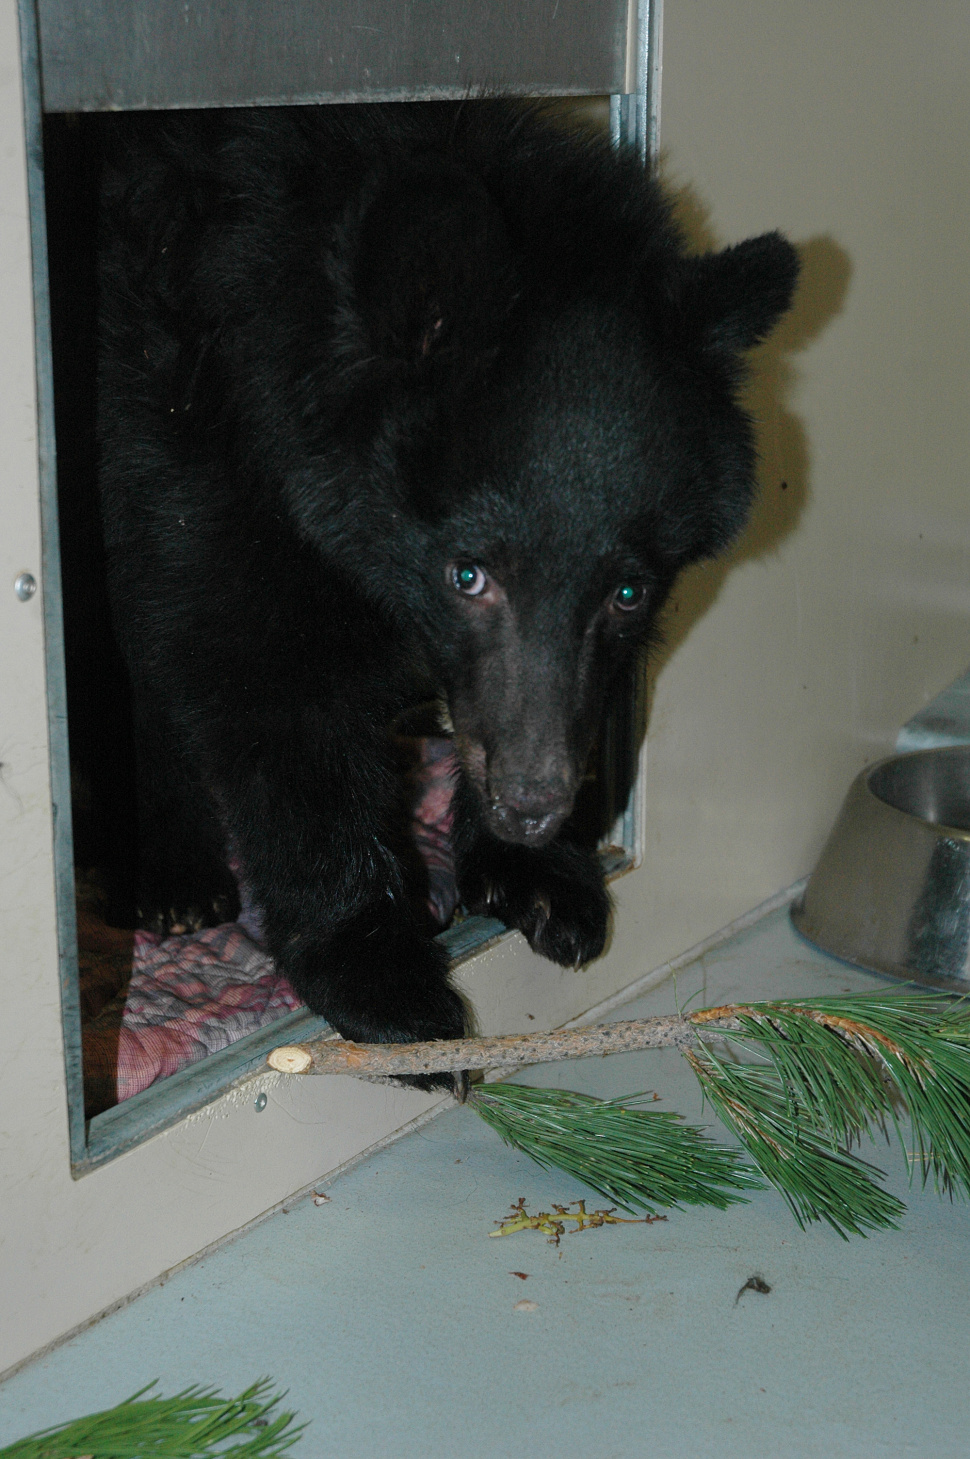 are black bears scared of dogs